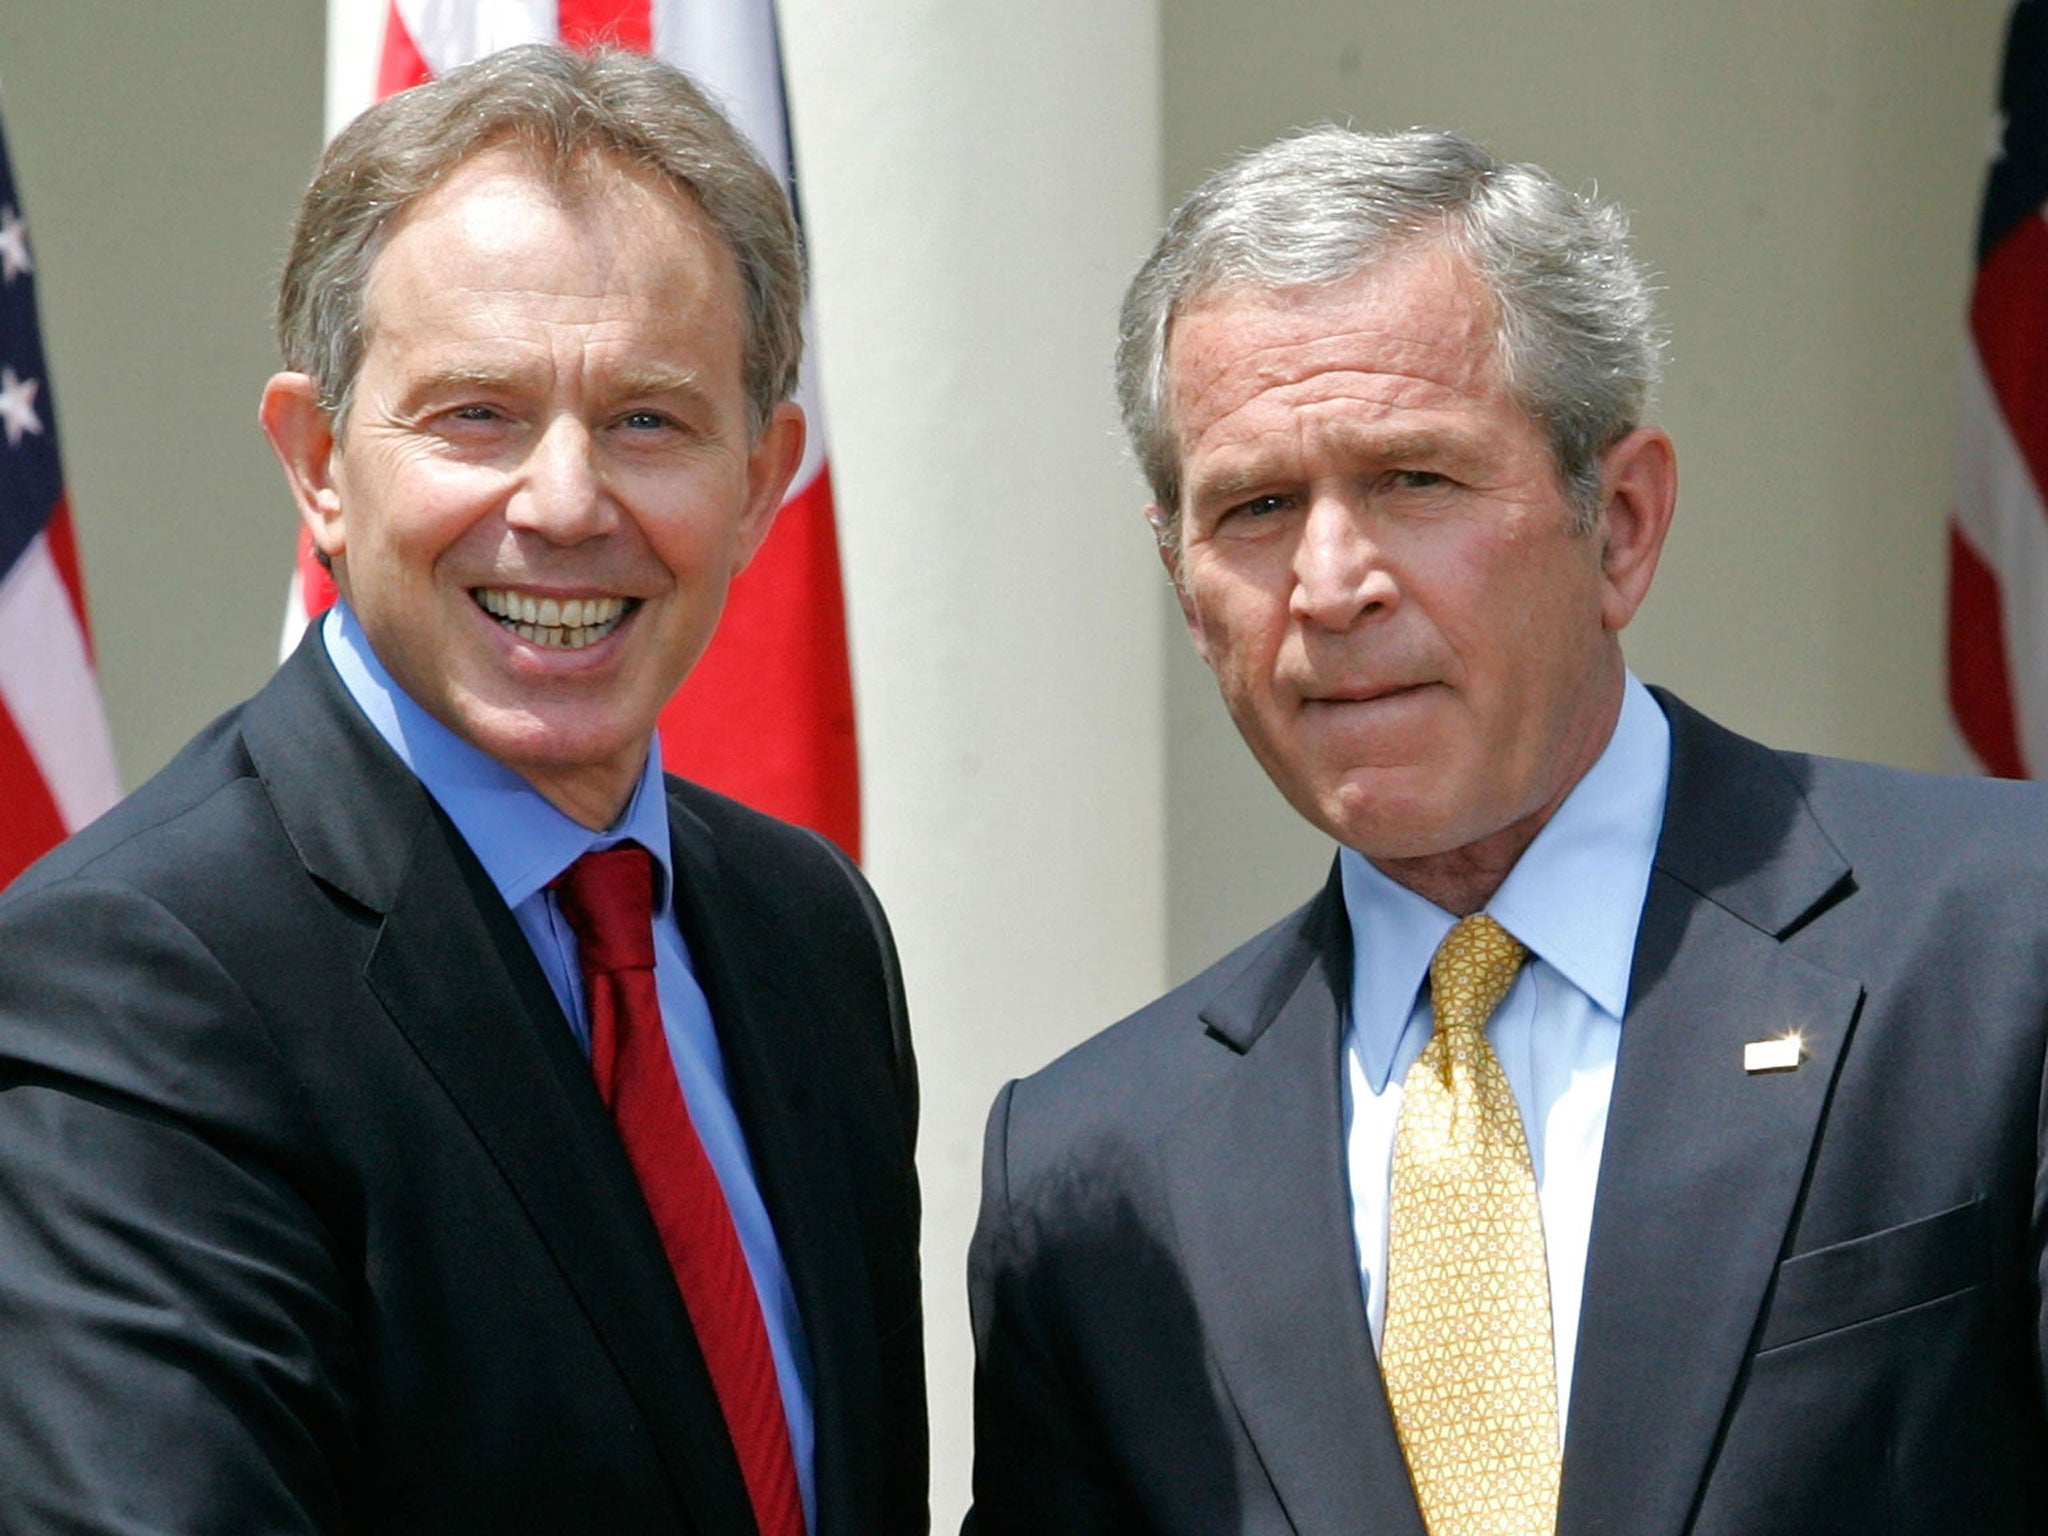 Tony Blair and US President George W Bush shake hands after a news conference in the Rose Garden of the White House in Washington, 2007